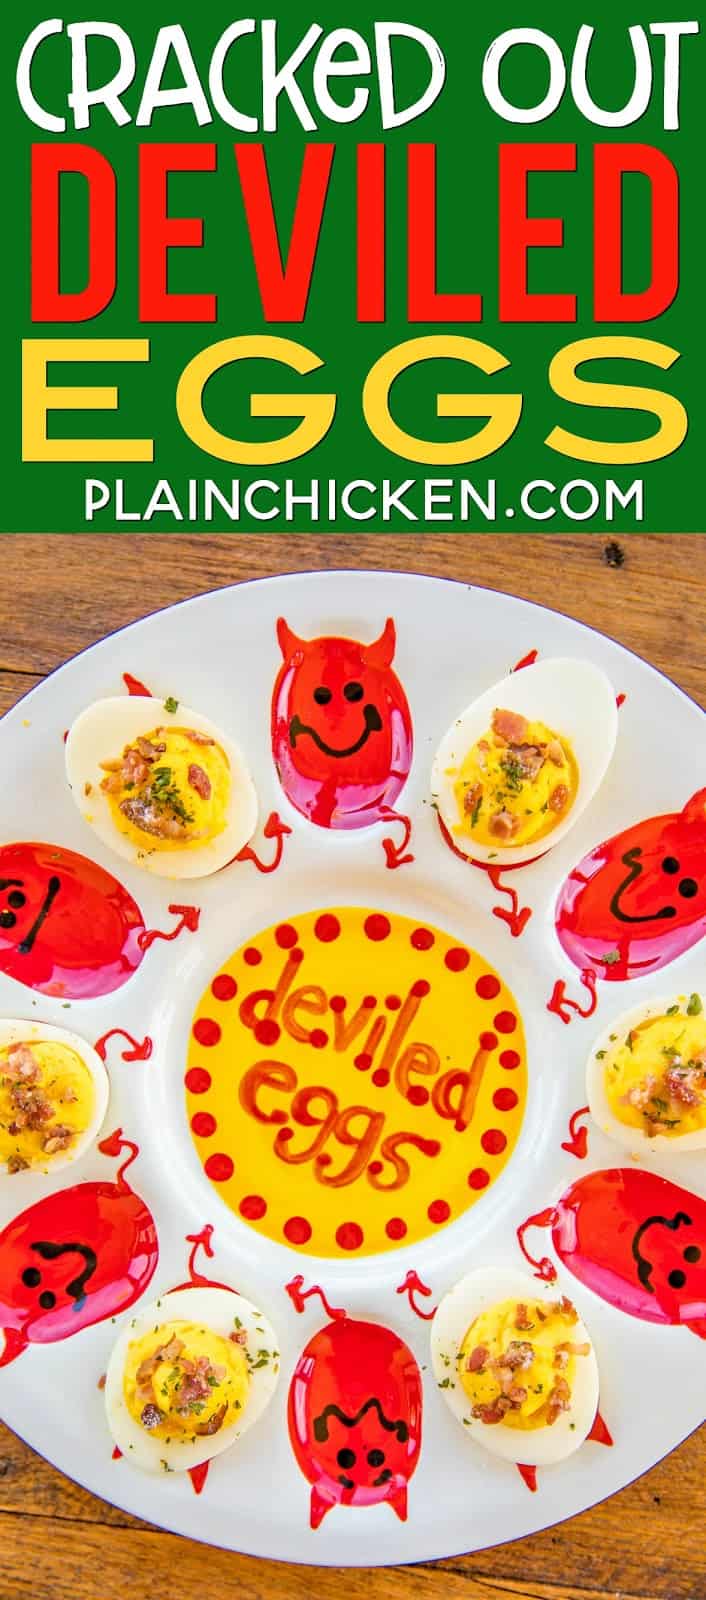 Cracked Out Deviled Eggs - deviled eggs loaded with cheddar, bacon and ranch. These things are dangerously DELICIOUS!!! Can make ahead and refrigerate overnight. Hard boiled eggs, mayonnaise, ranch dressing, cheddar cheese, vinegar, salt, mustard, pepper, onion powder and bacon. SO good!! #appetizer #eggs #hardboiledeggs #bacon